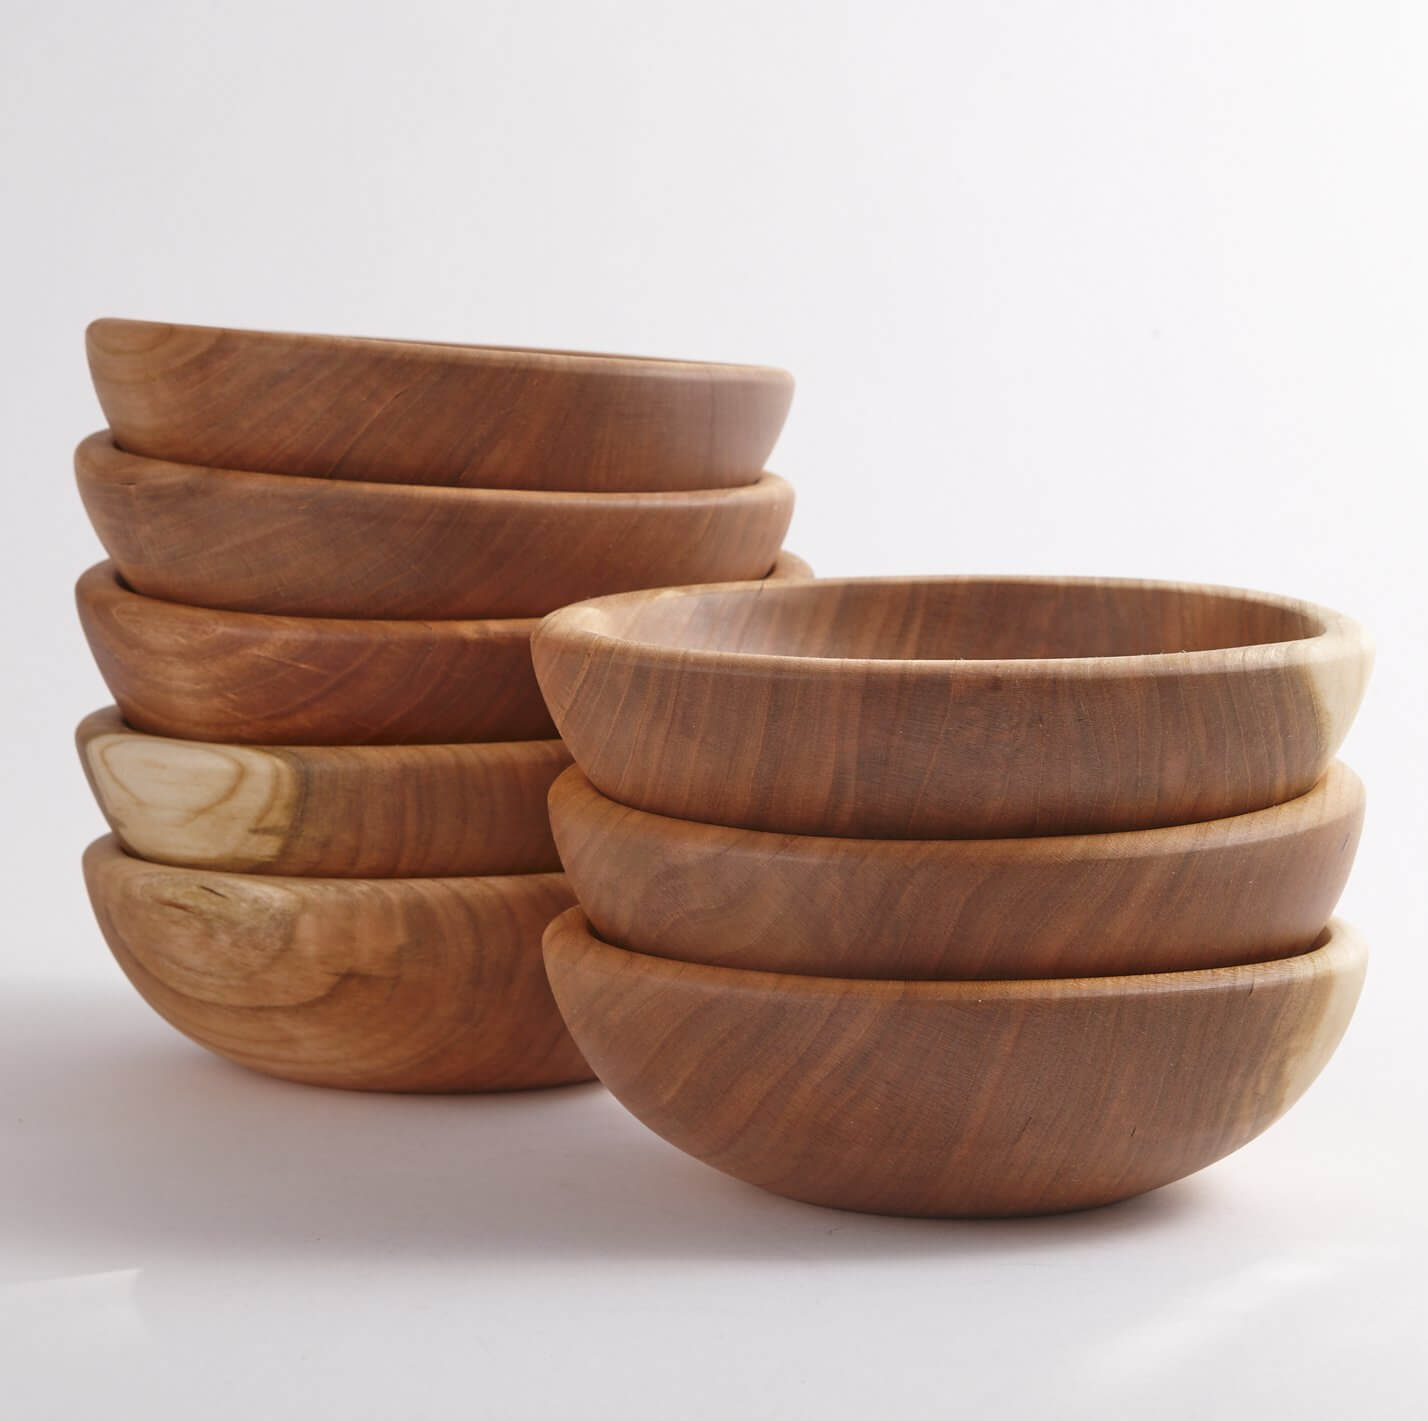 Small wooden bowl - single serving size made of cherry wood